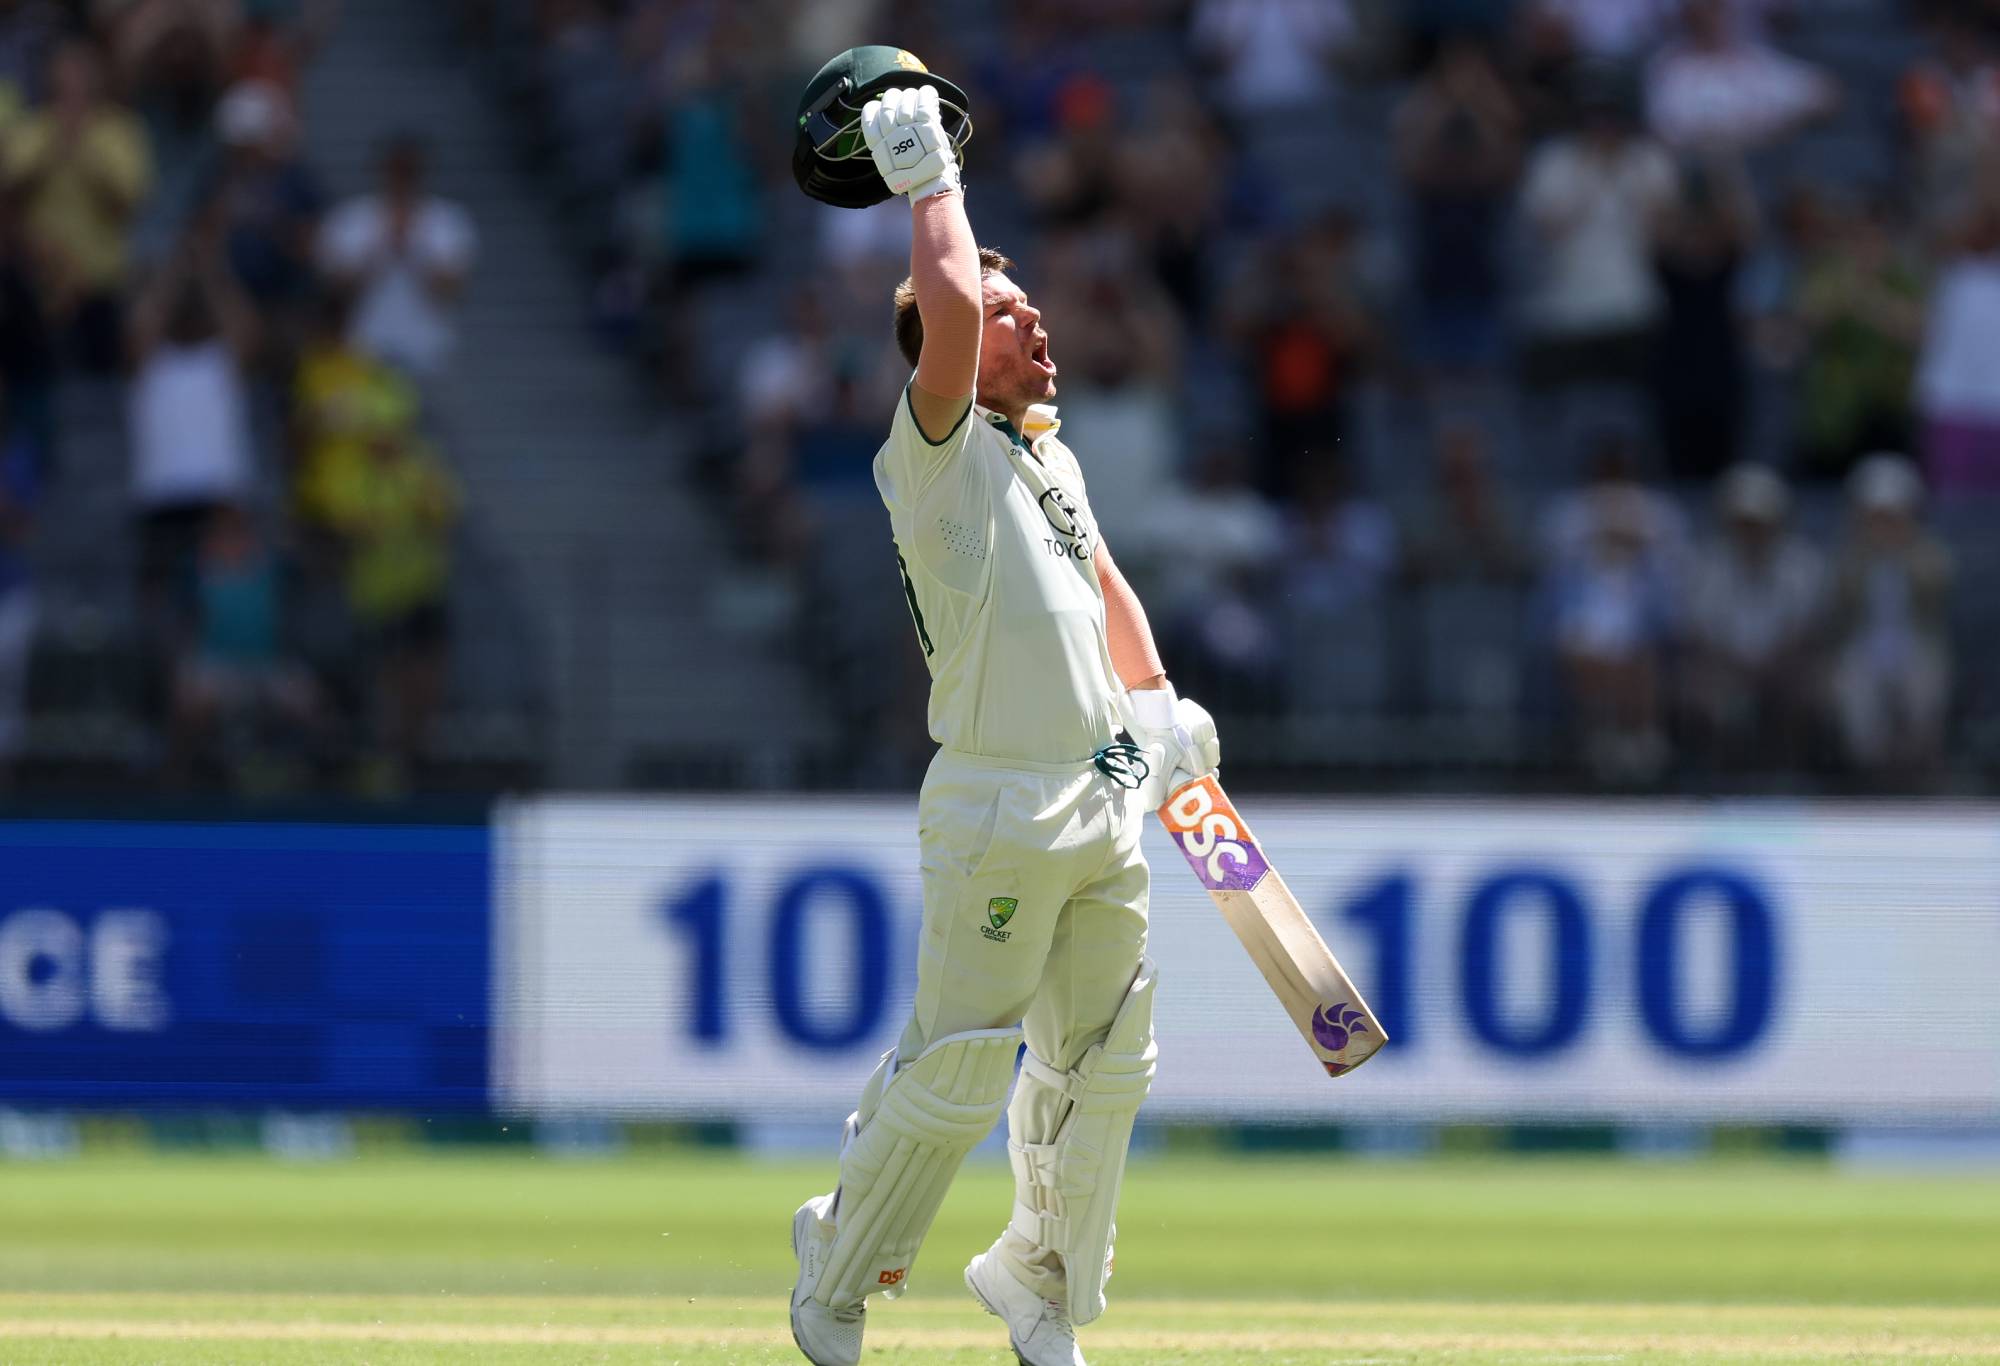 PERTH, AUSTRALIA - DECEMBER 14: David Warner of Australia celebrates after scoring a century during day one of the Men's First Test match between Australia and Pakistan at Optus Stadium on December 14, 2023 in Perth, Australia. (Photo by Paul Kane/Getty Images)